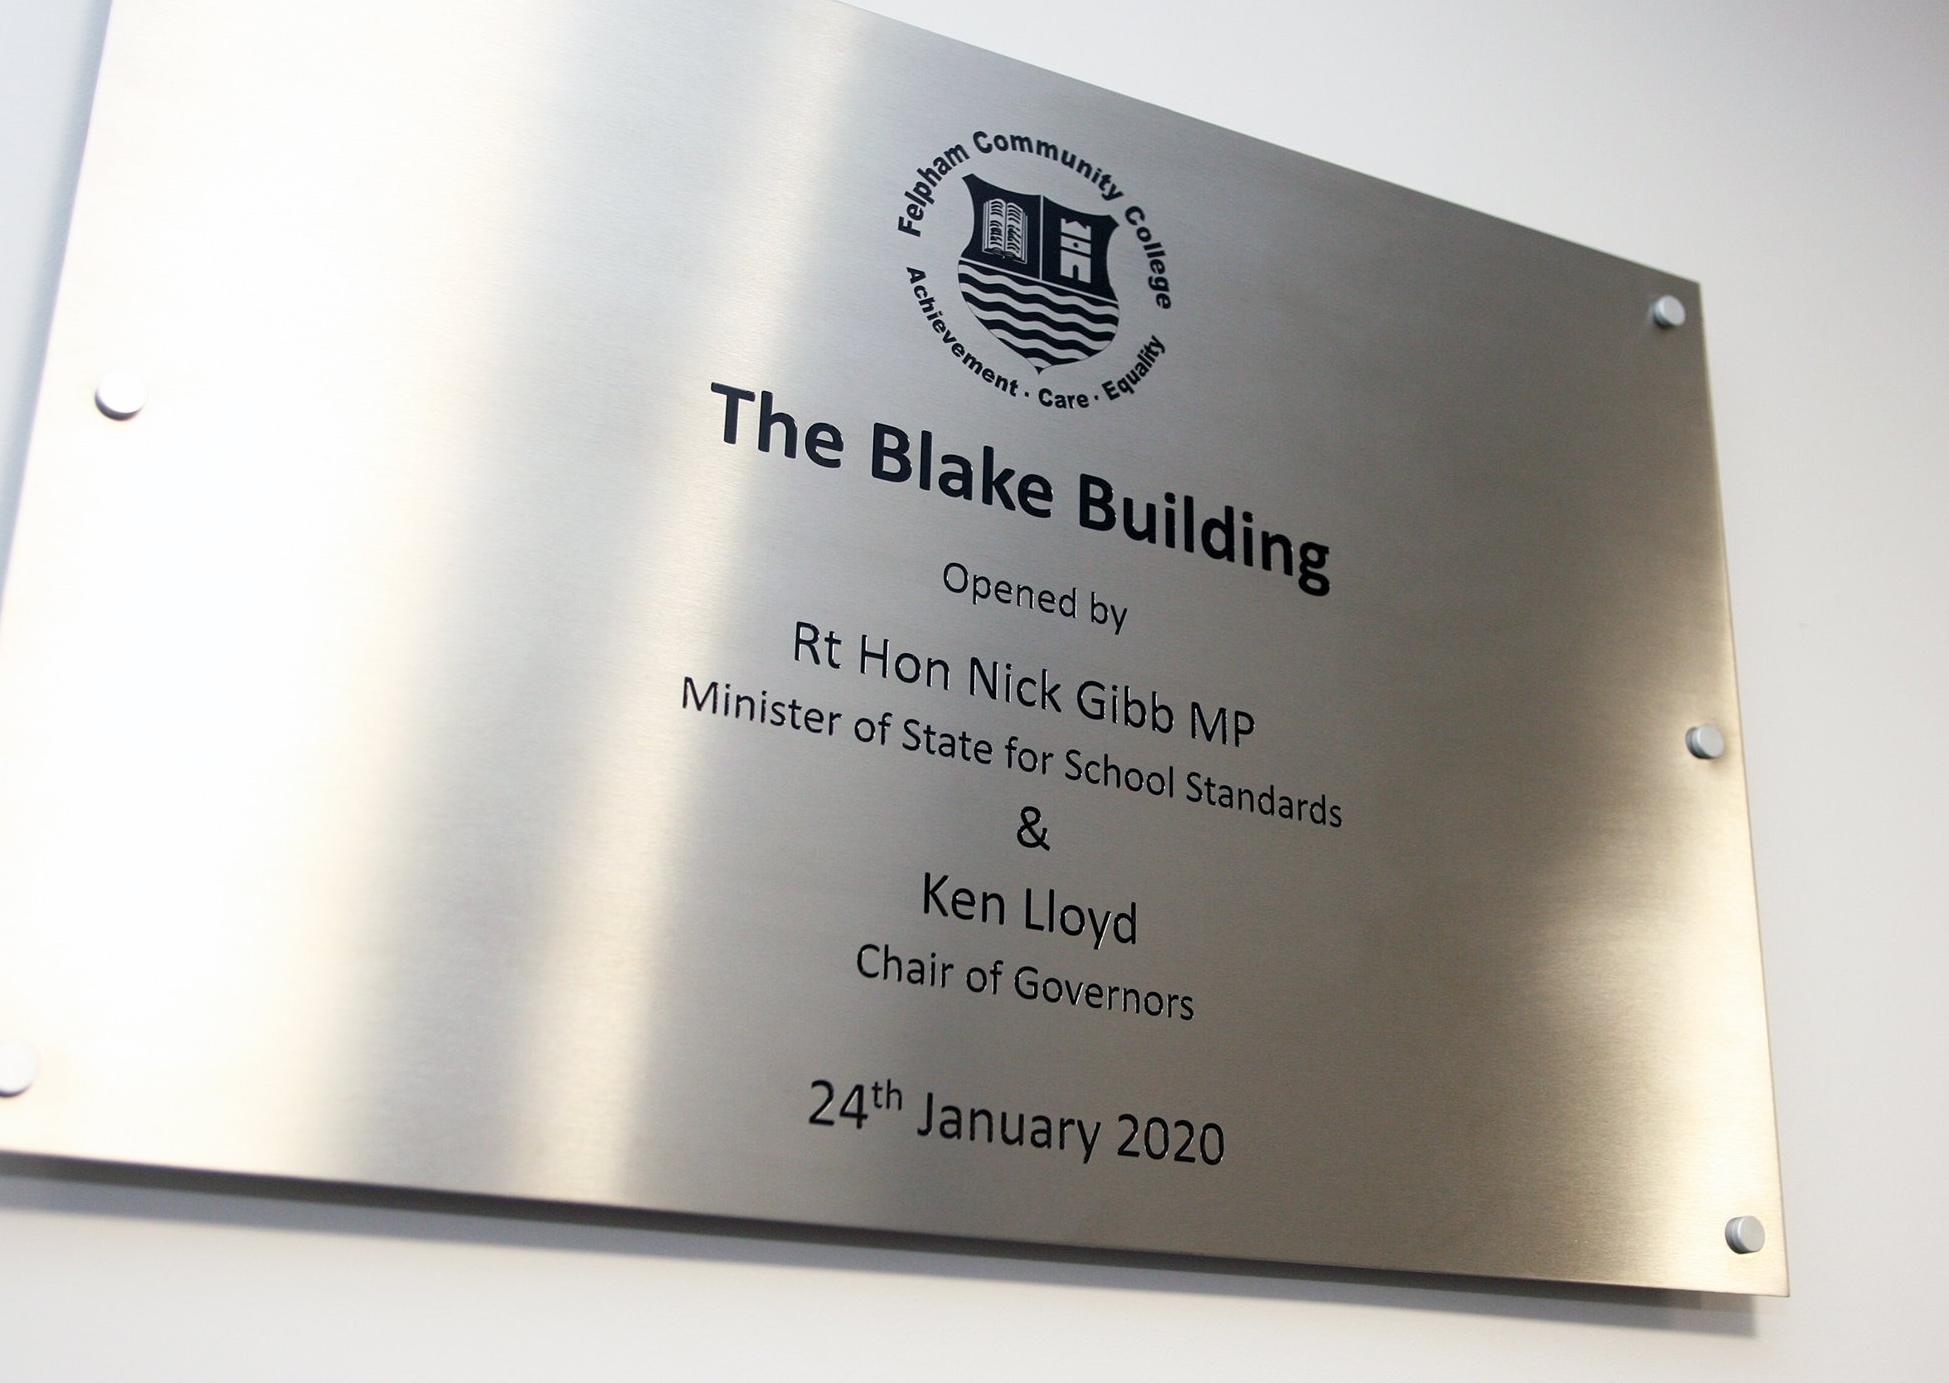 The official opening of the new Blake Building